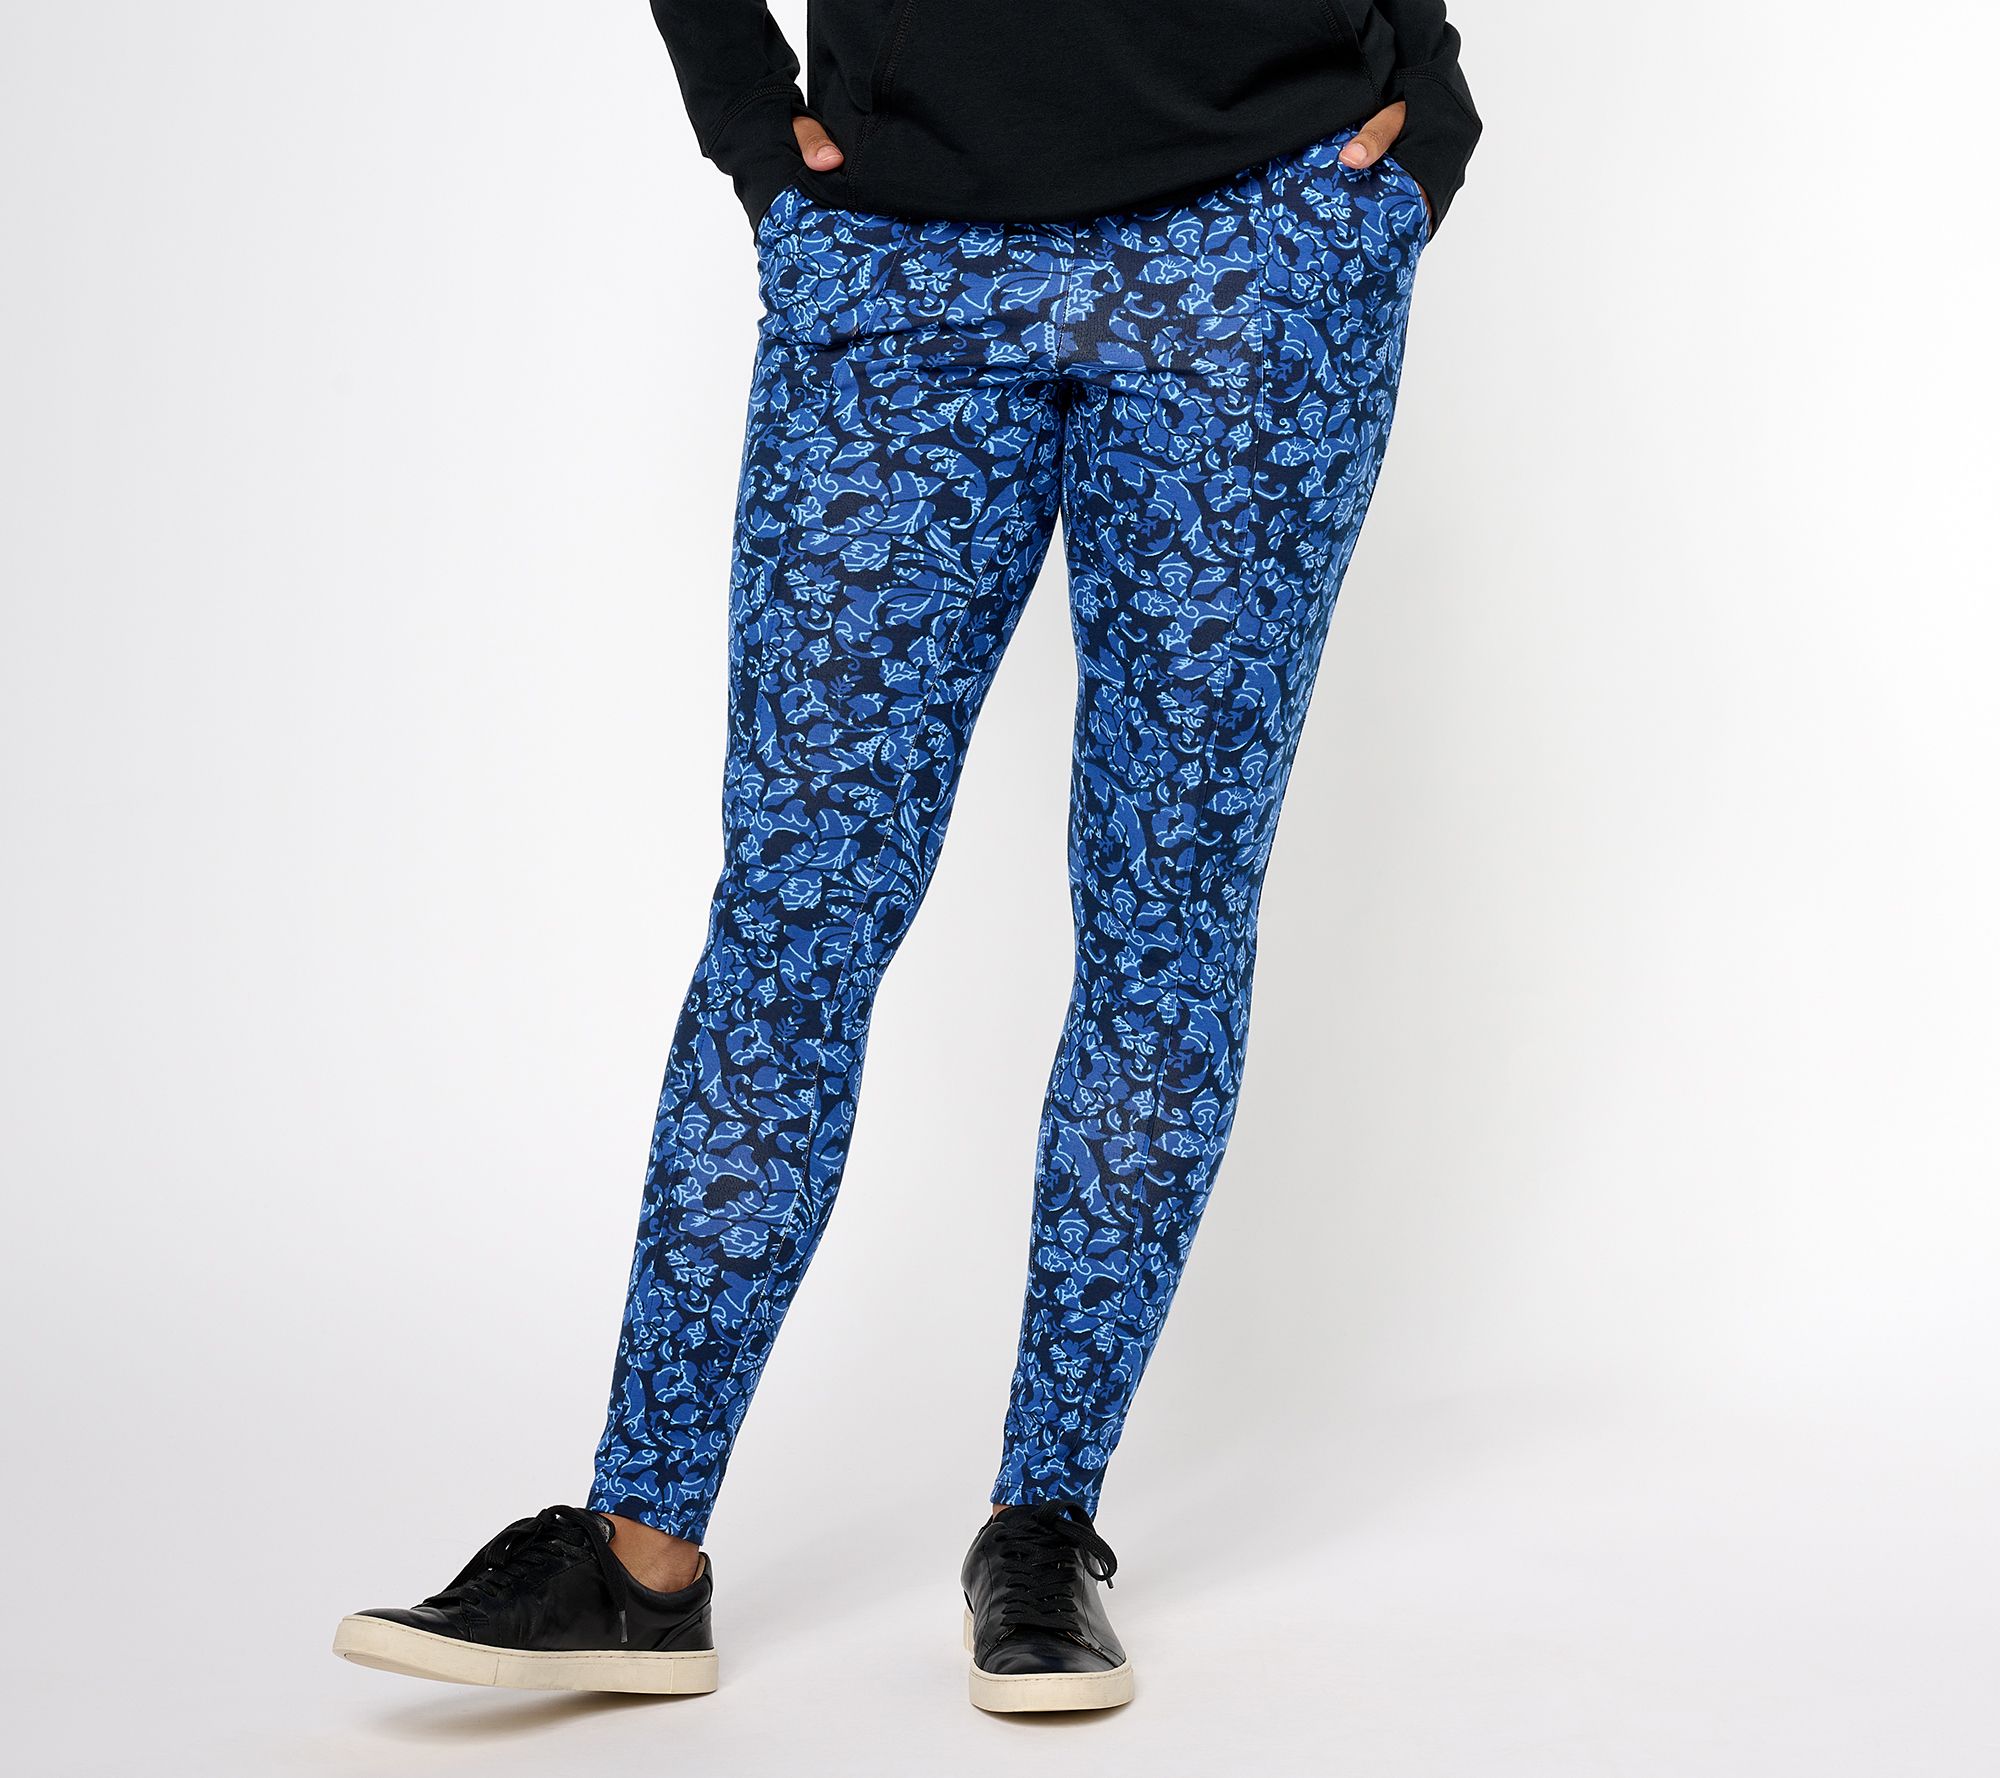 Denim & Co. Active Regular Printed Duo Stretch Legging with Pintuck